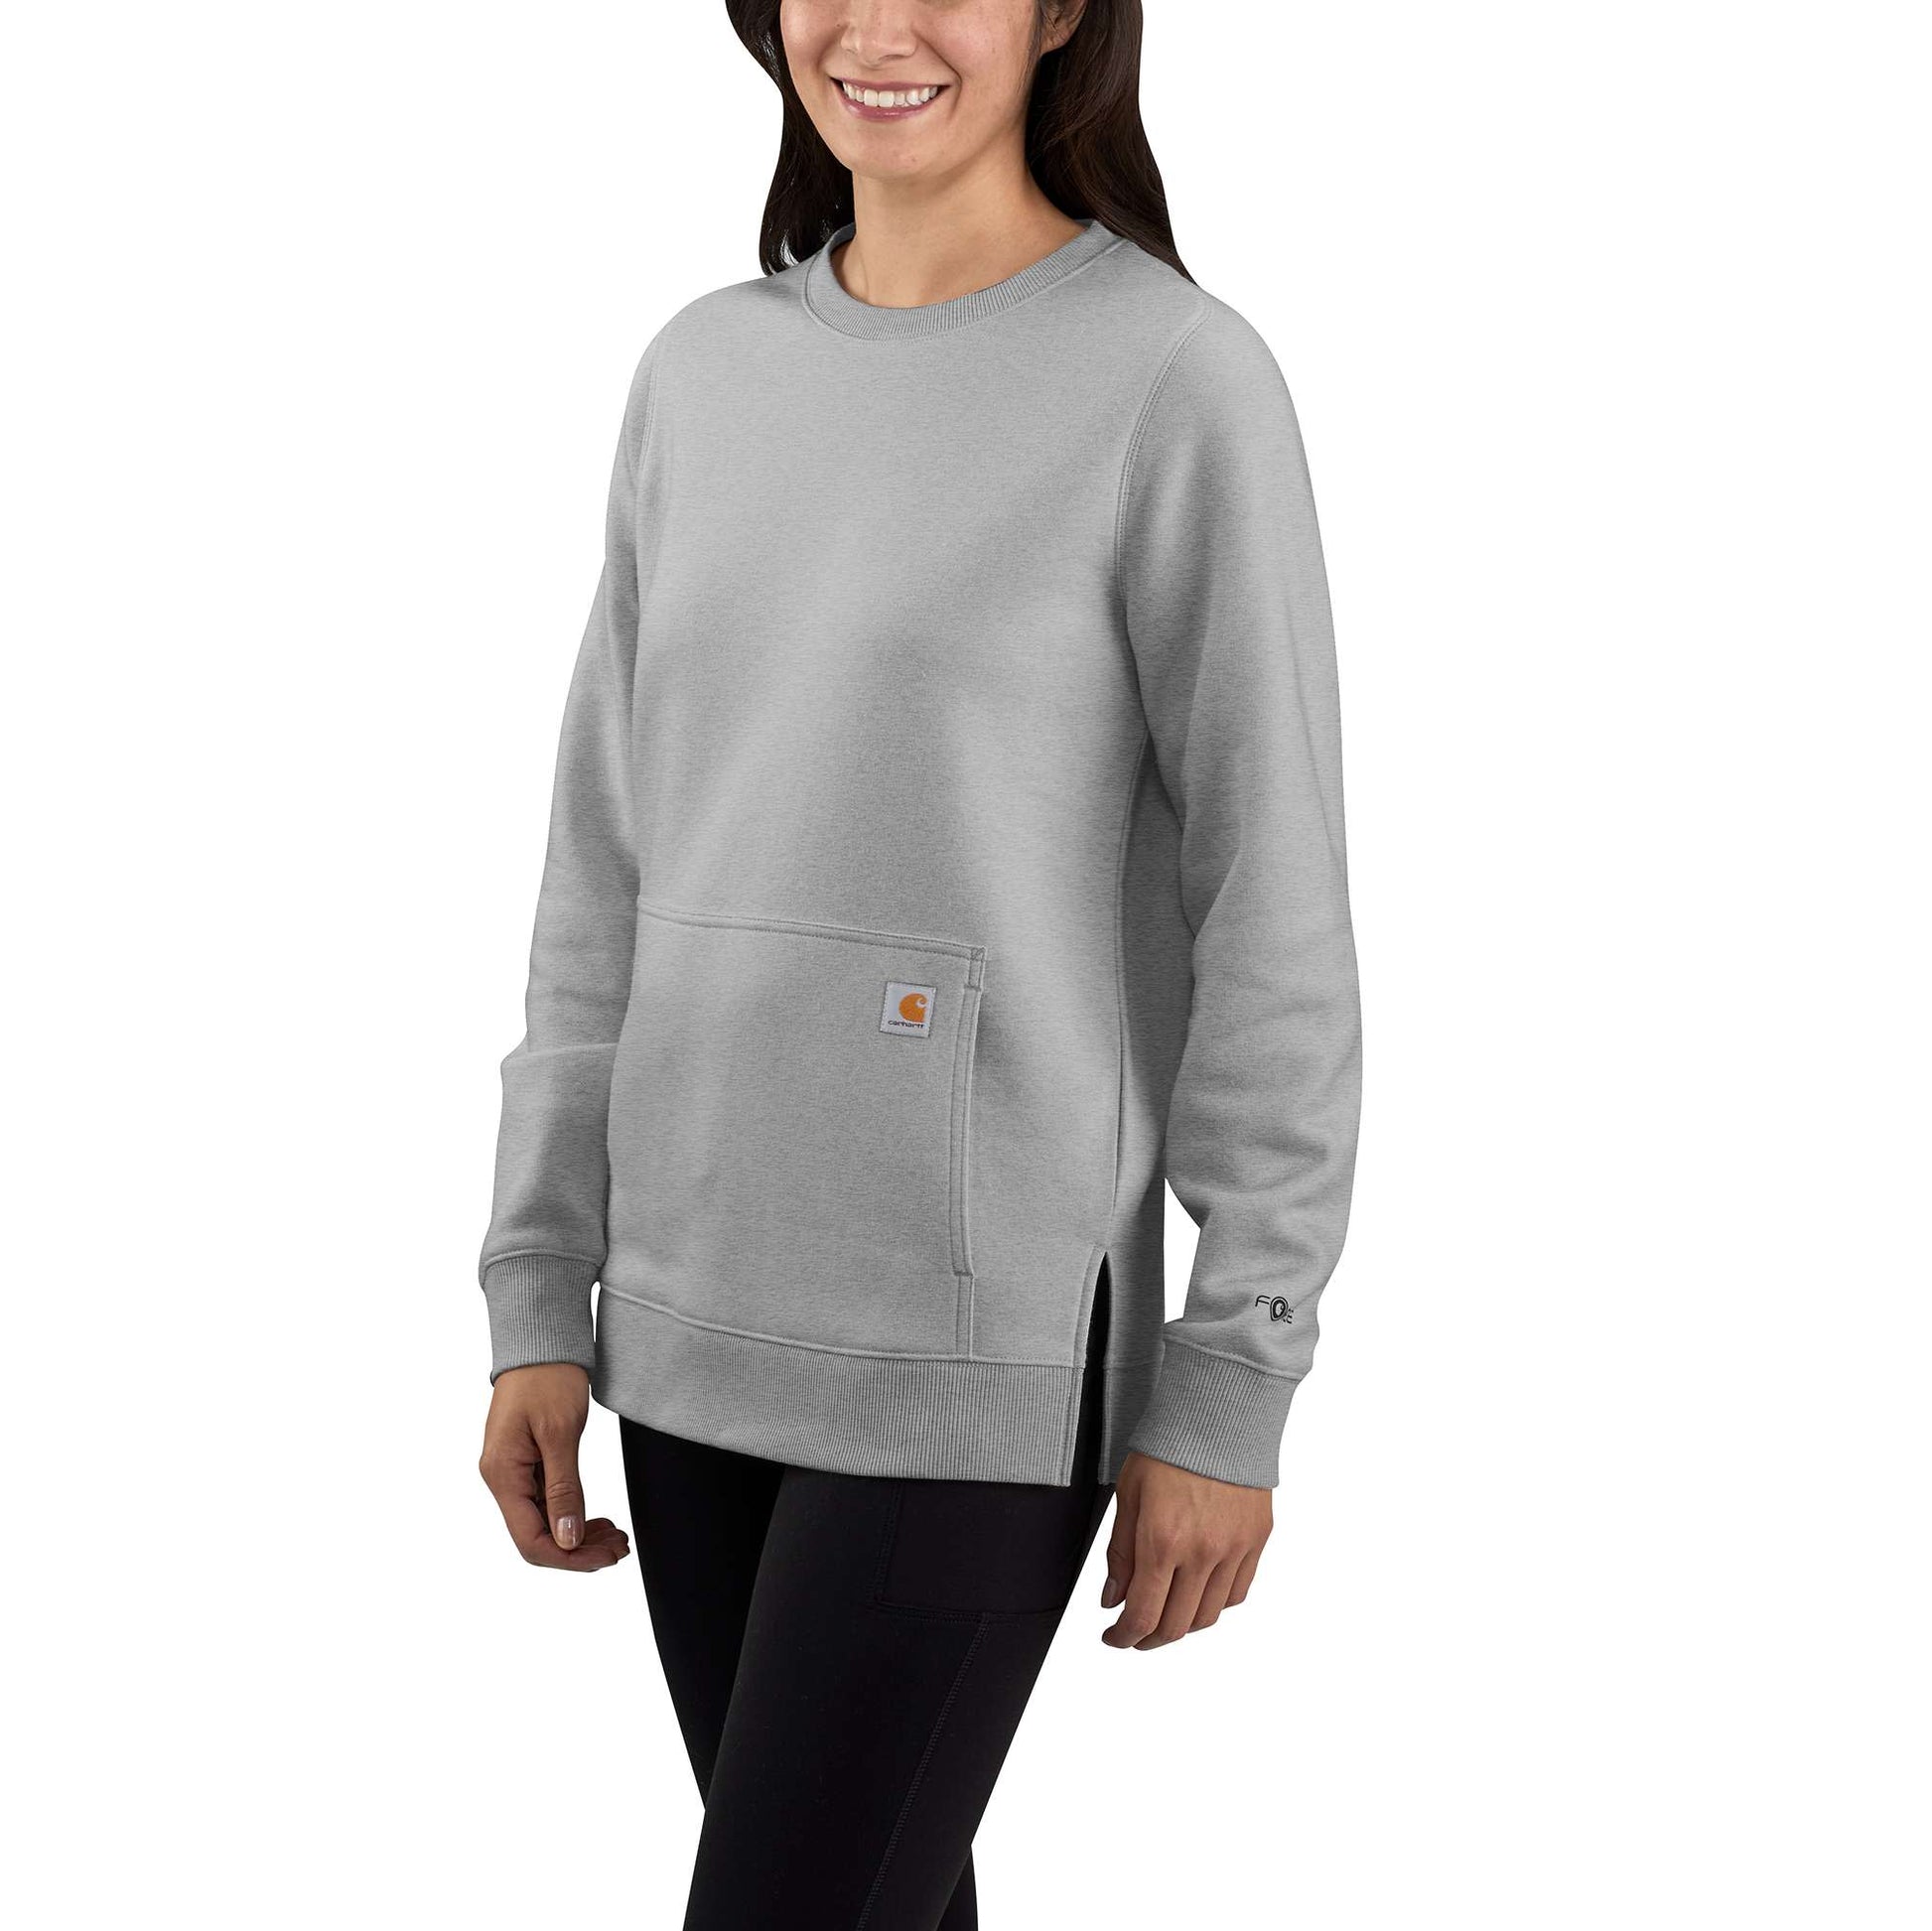 Force Relaxed Fit Lightweight Sweatshirt